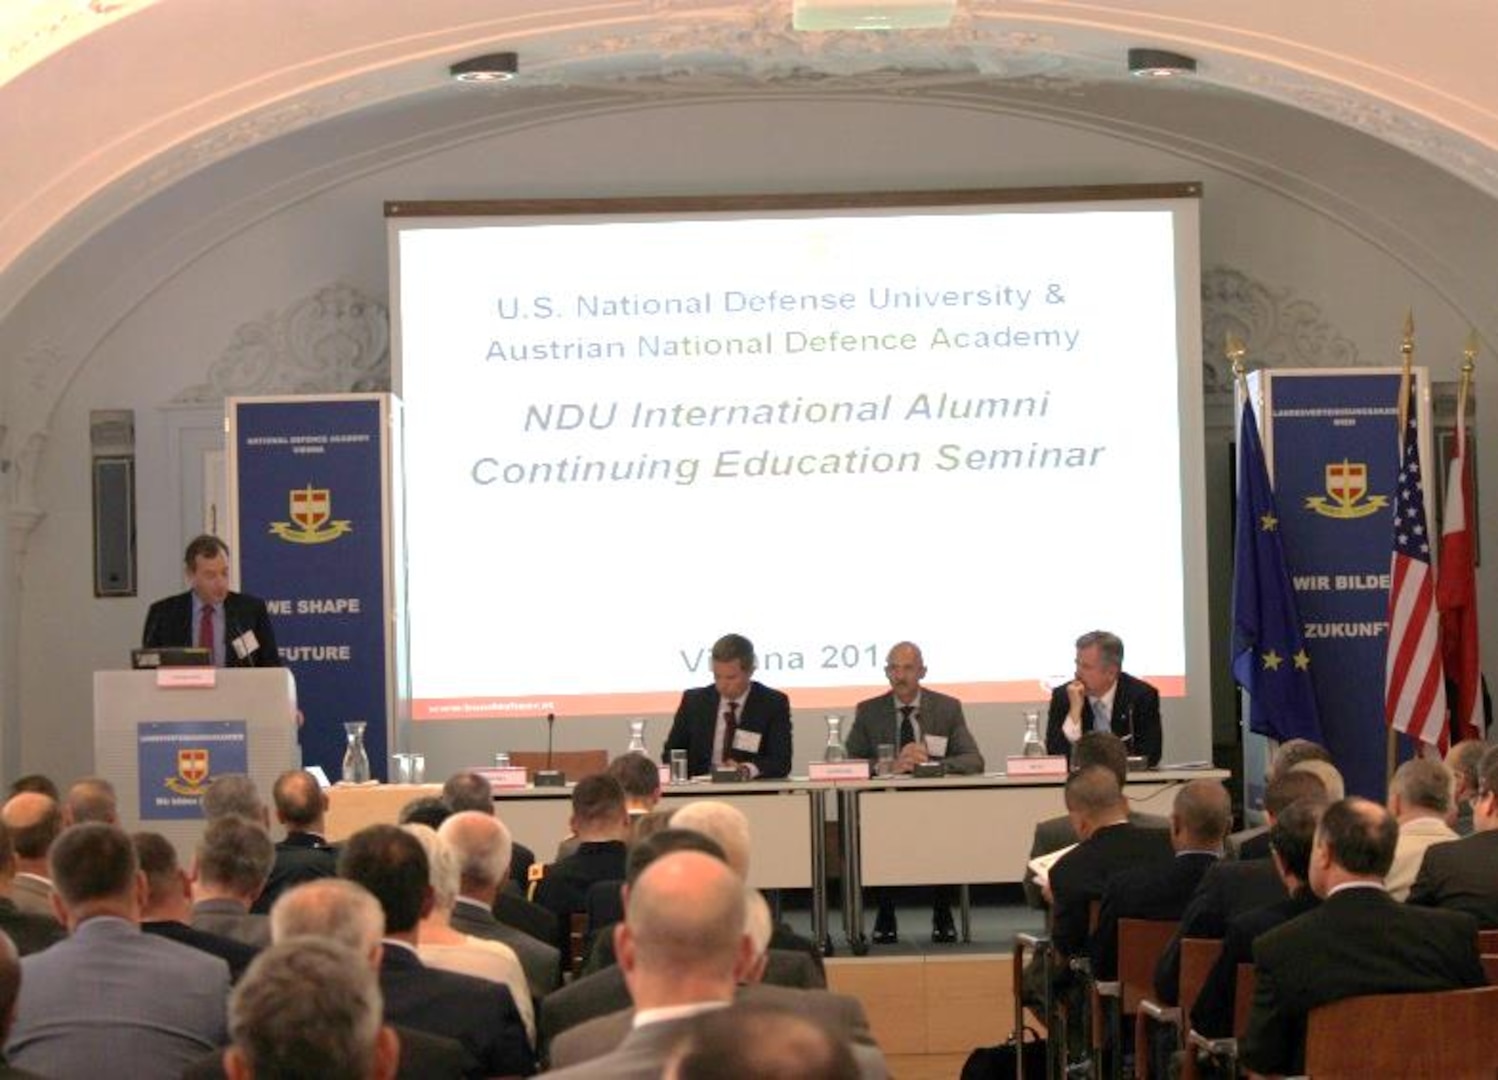 Seminar participants included 70 alumni from over 30 countries and represented each of NDU’s five colleges.